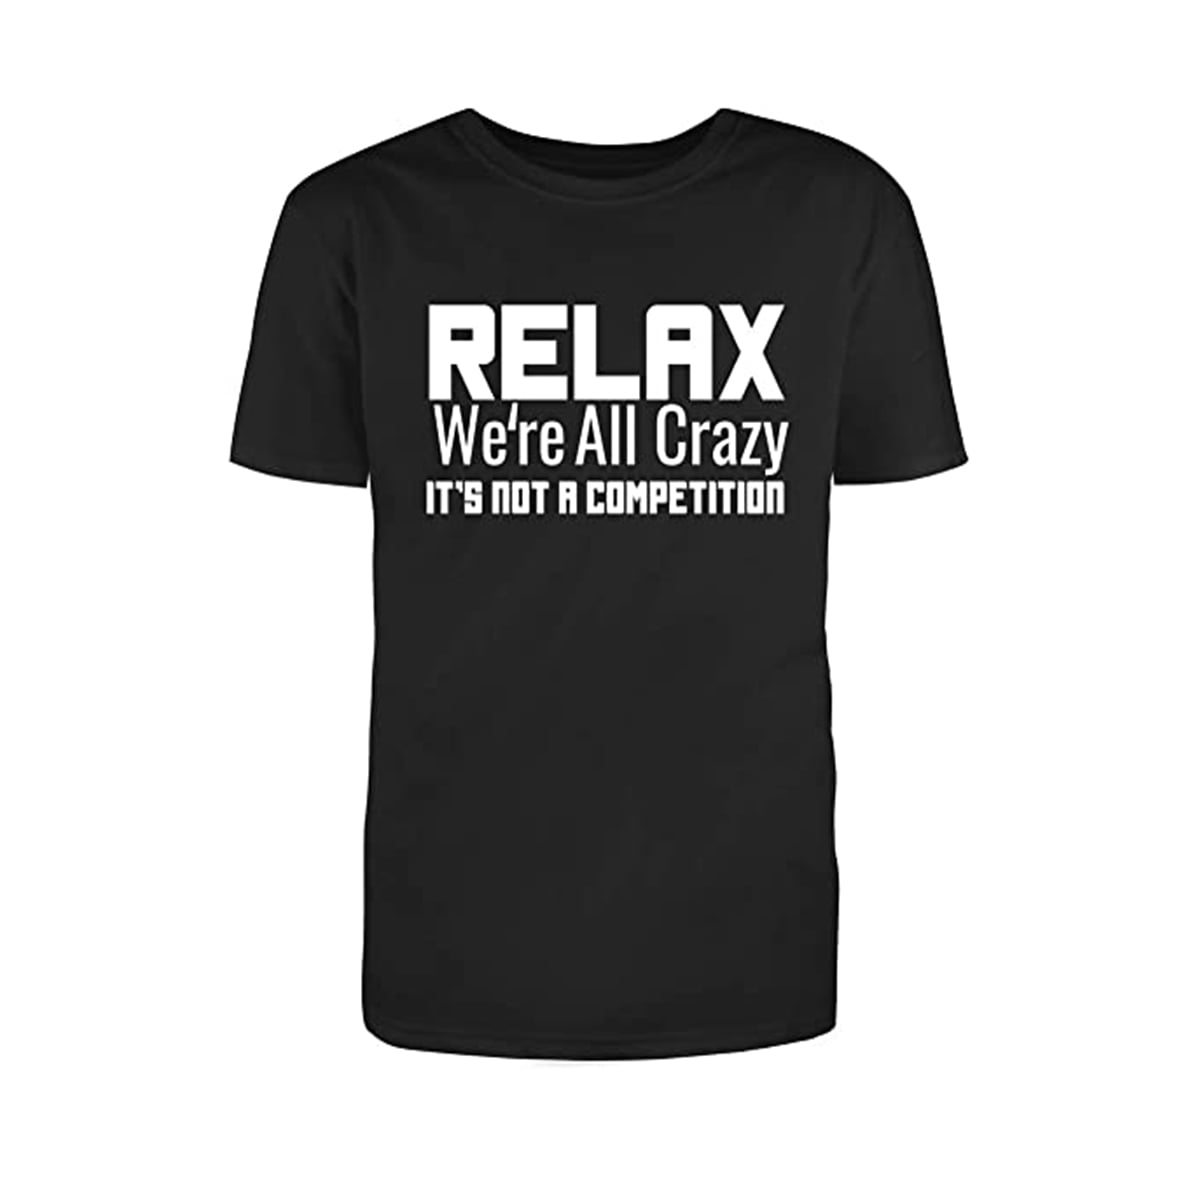 Novelty T-Shirt Adult Unisex T-Shirt Humor T-Shirt Relax We Are All Crazy Funny T-Shirt